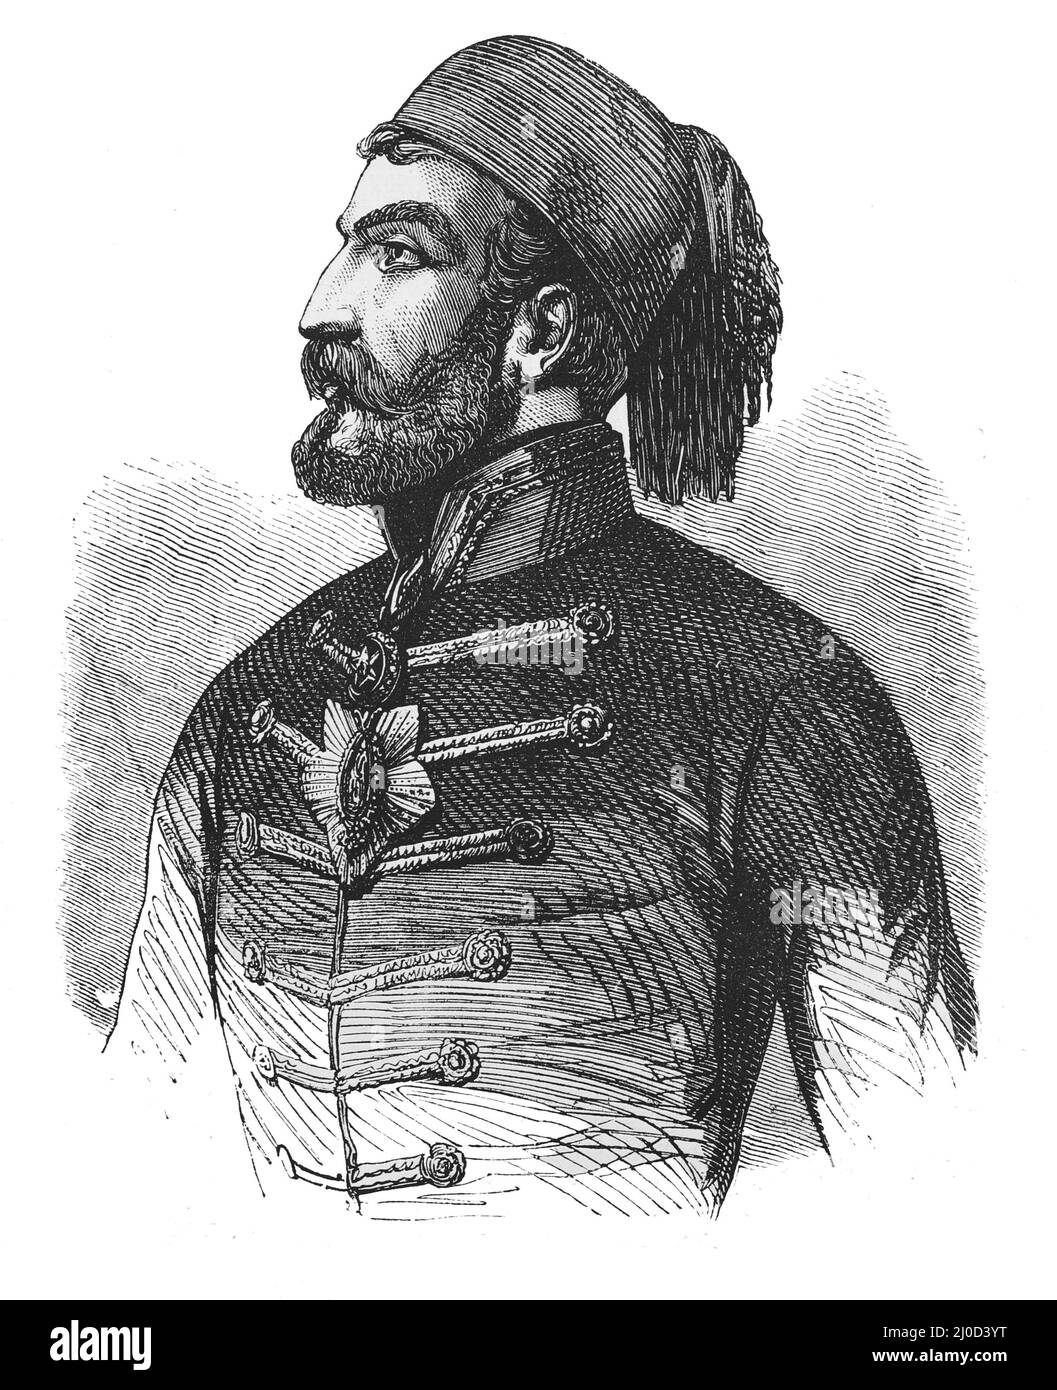 Portrait of Omer Pasha, Ottoman Field Marshal and Governor; Black and White Illustration Stock Photo